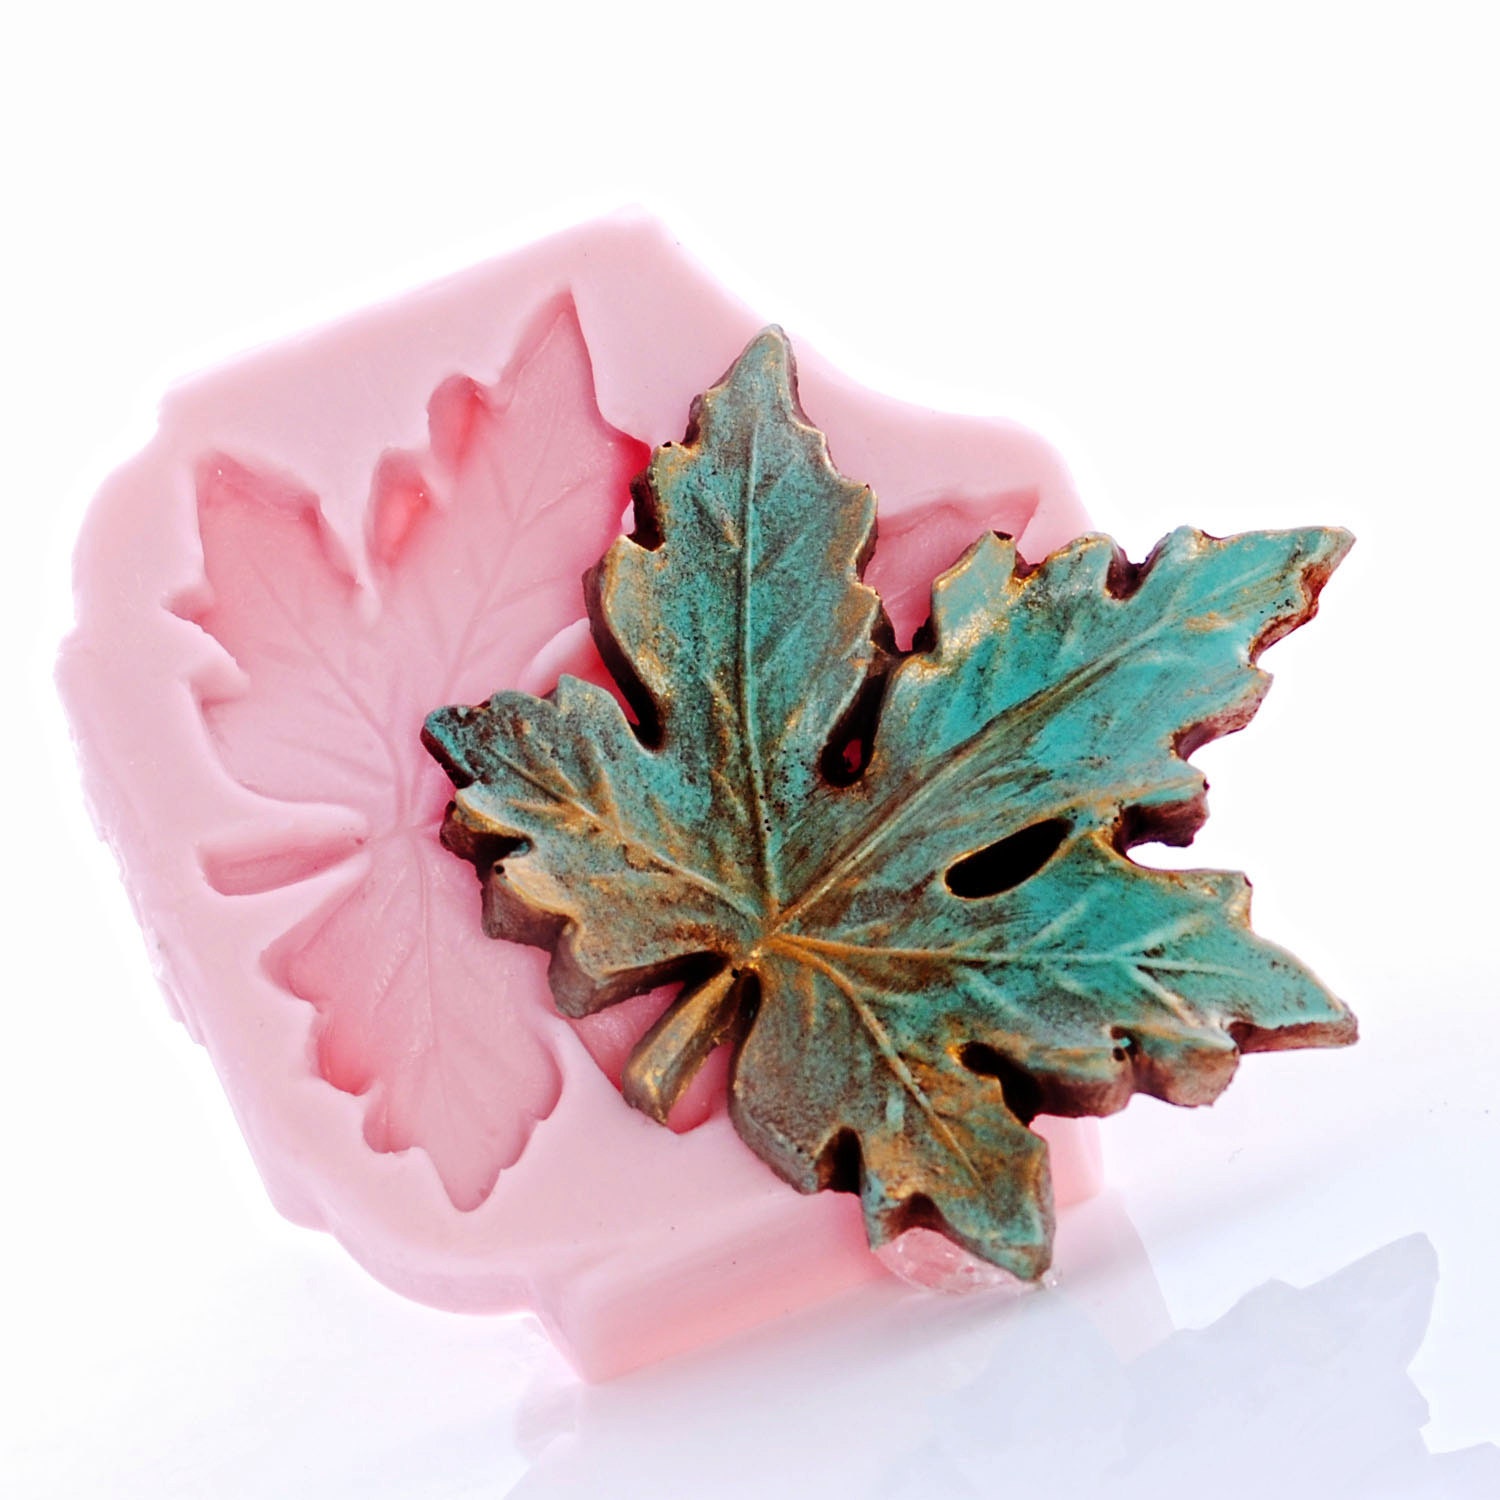 RYCORE Pot Leaf Silicone Mold Design | Silicone Molds for Baking Unique Treats & Gummies